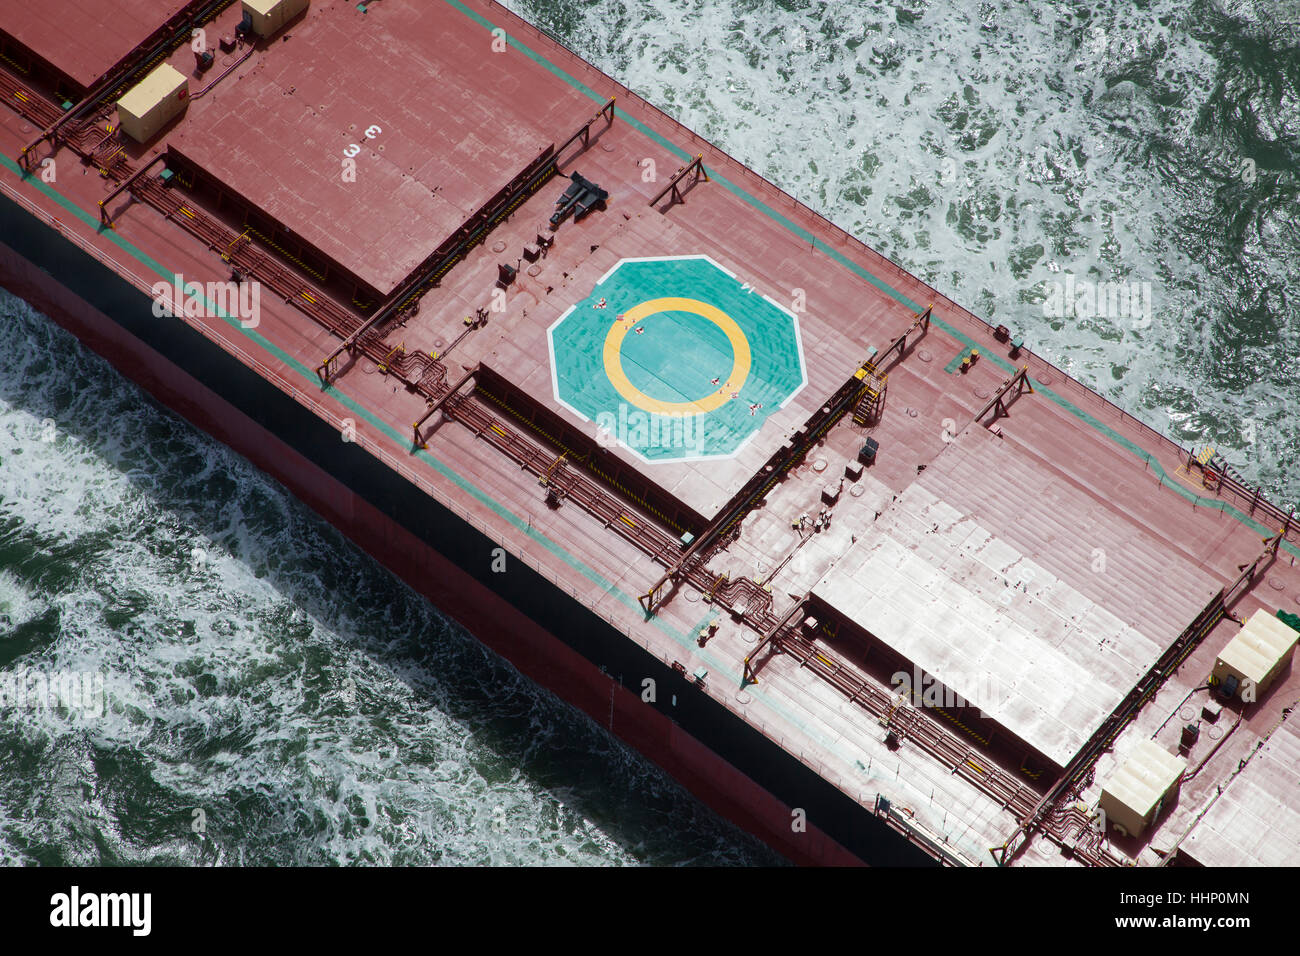 Aerial view of helipad on freighter Stock Photo